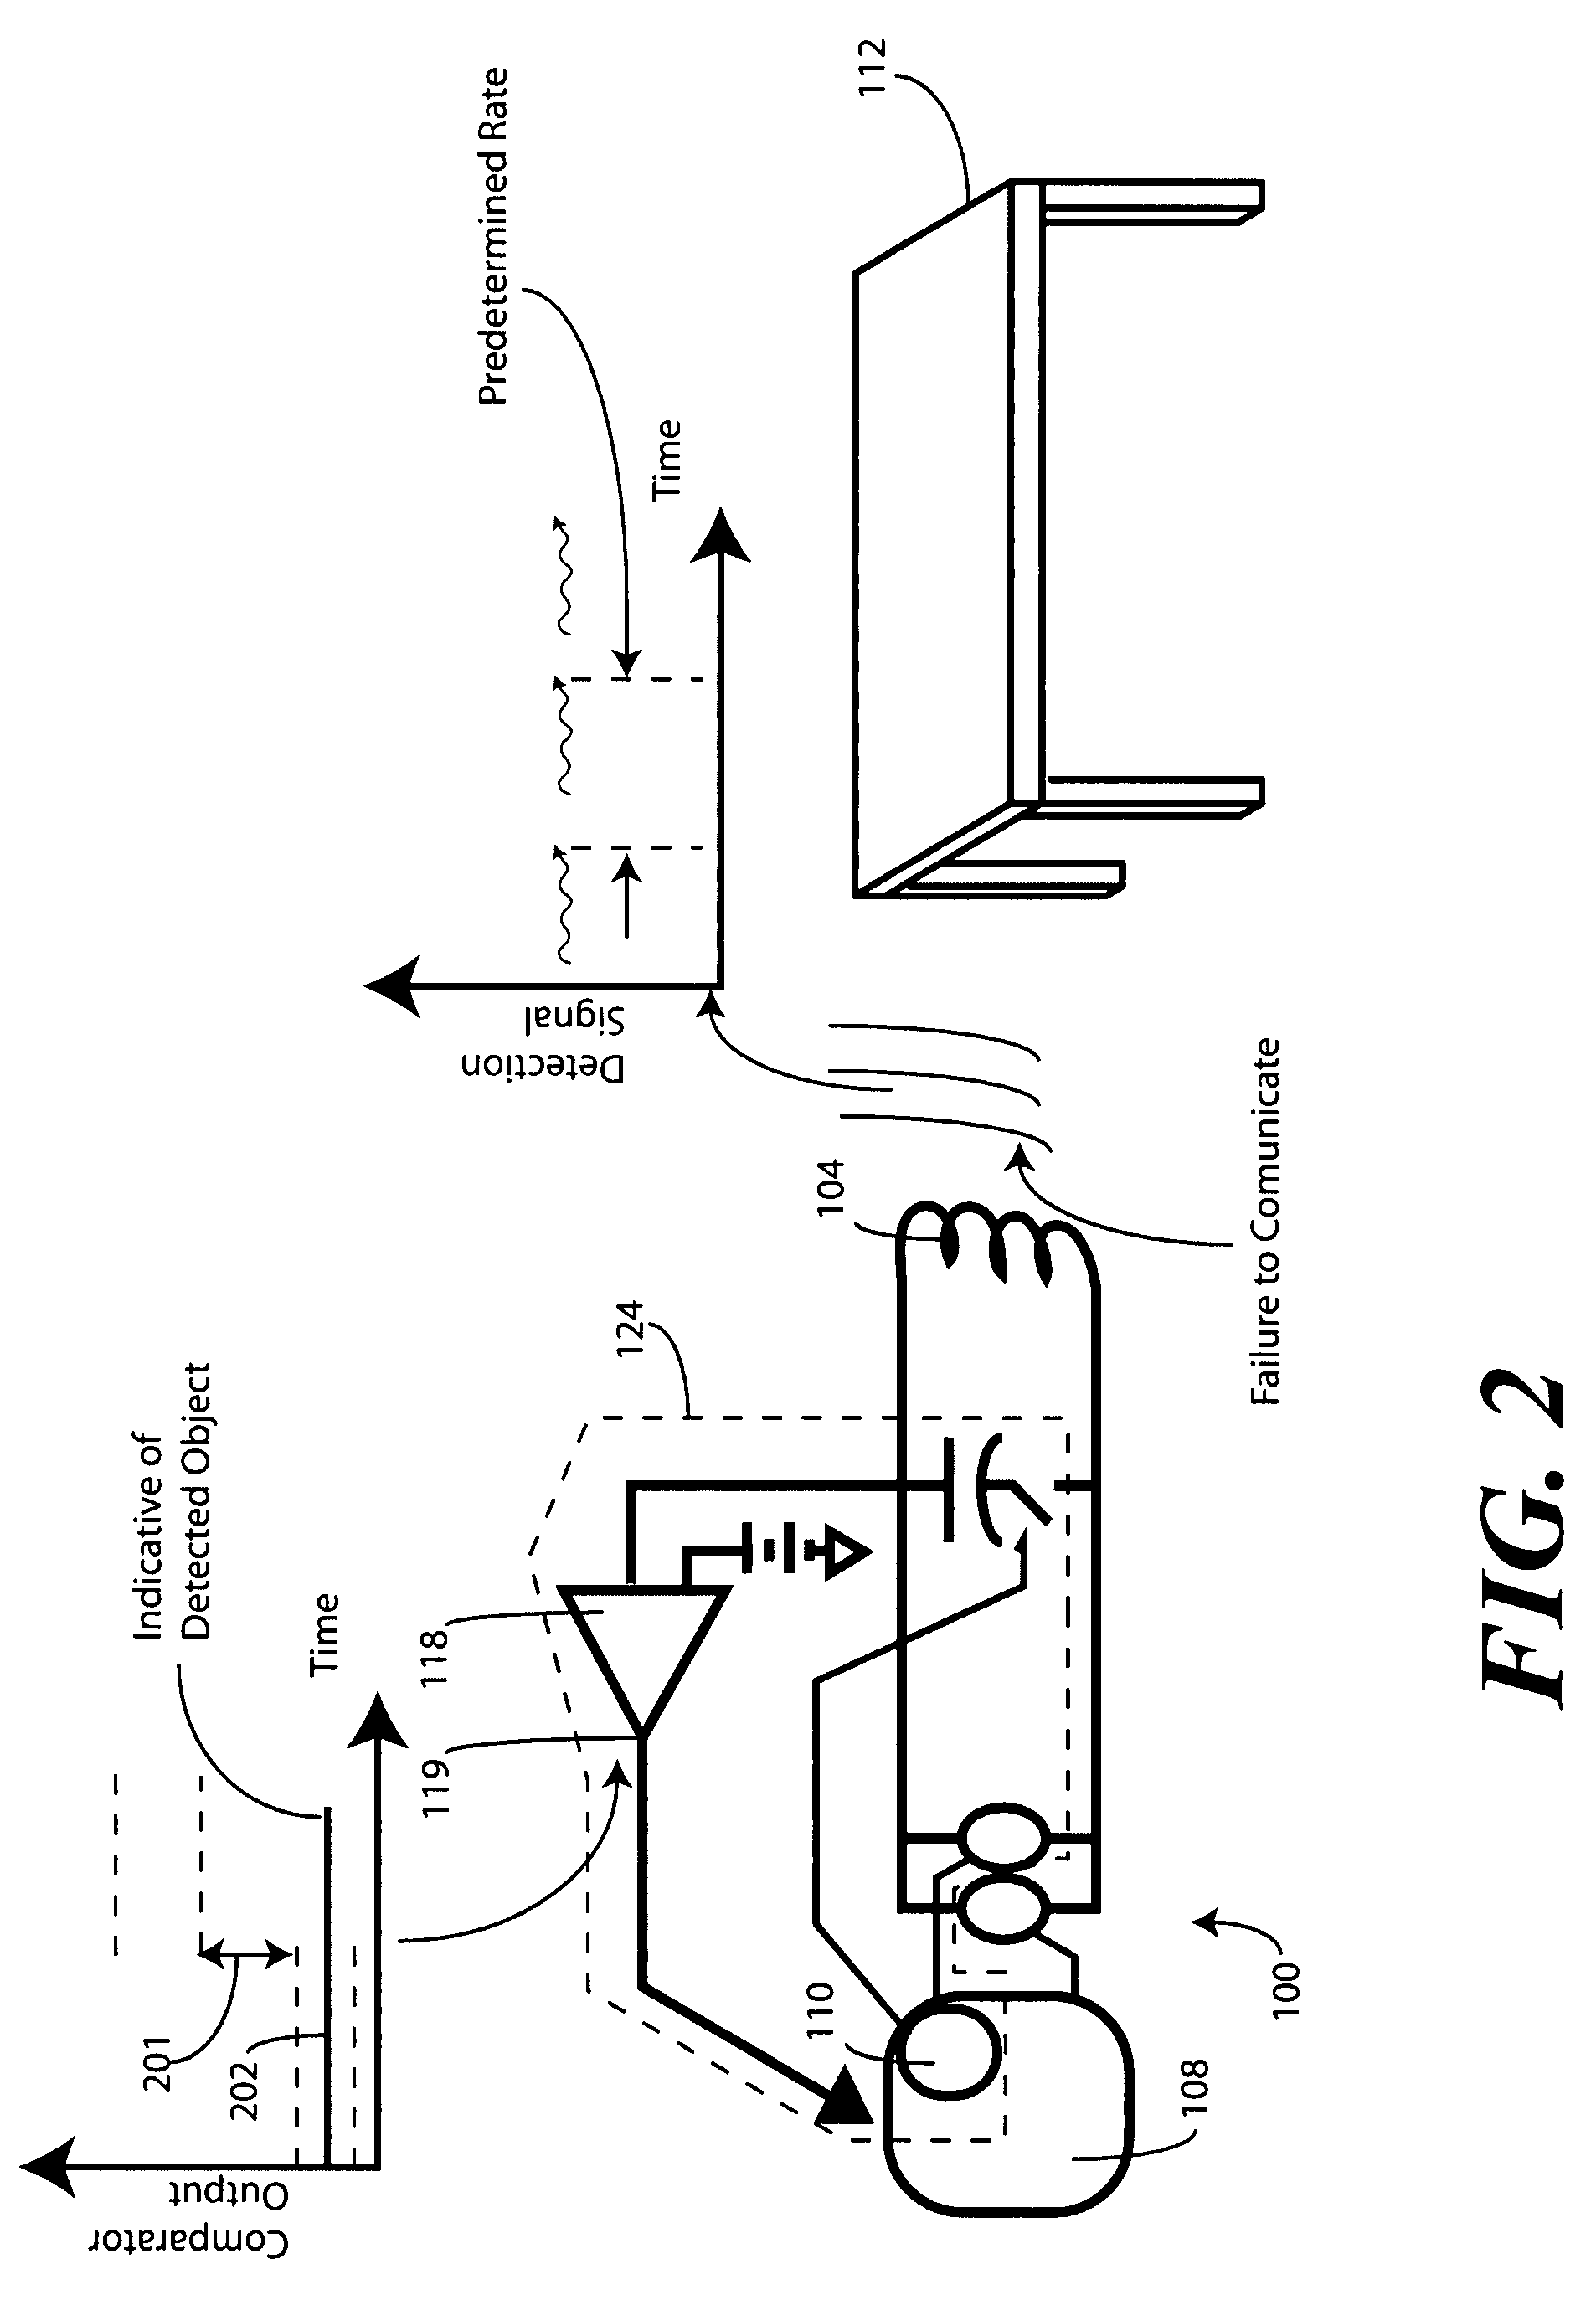 Detection apparatus and method for near field communication devices